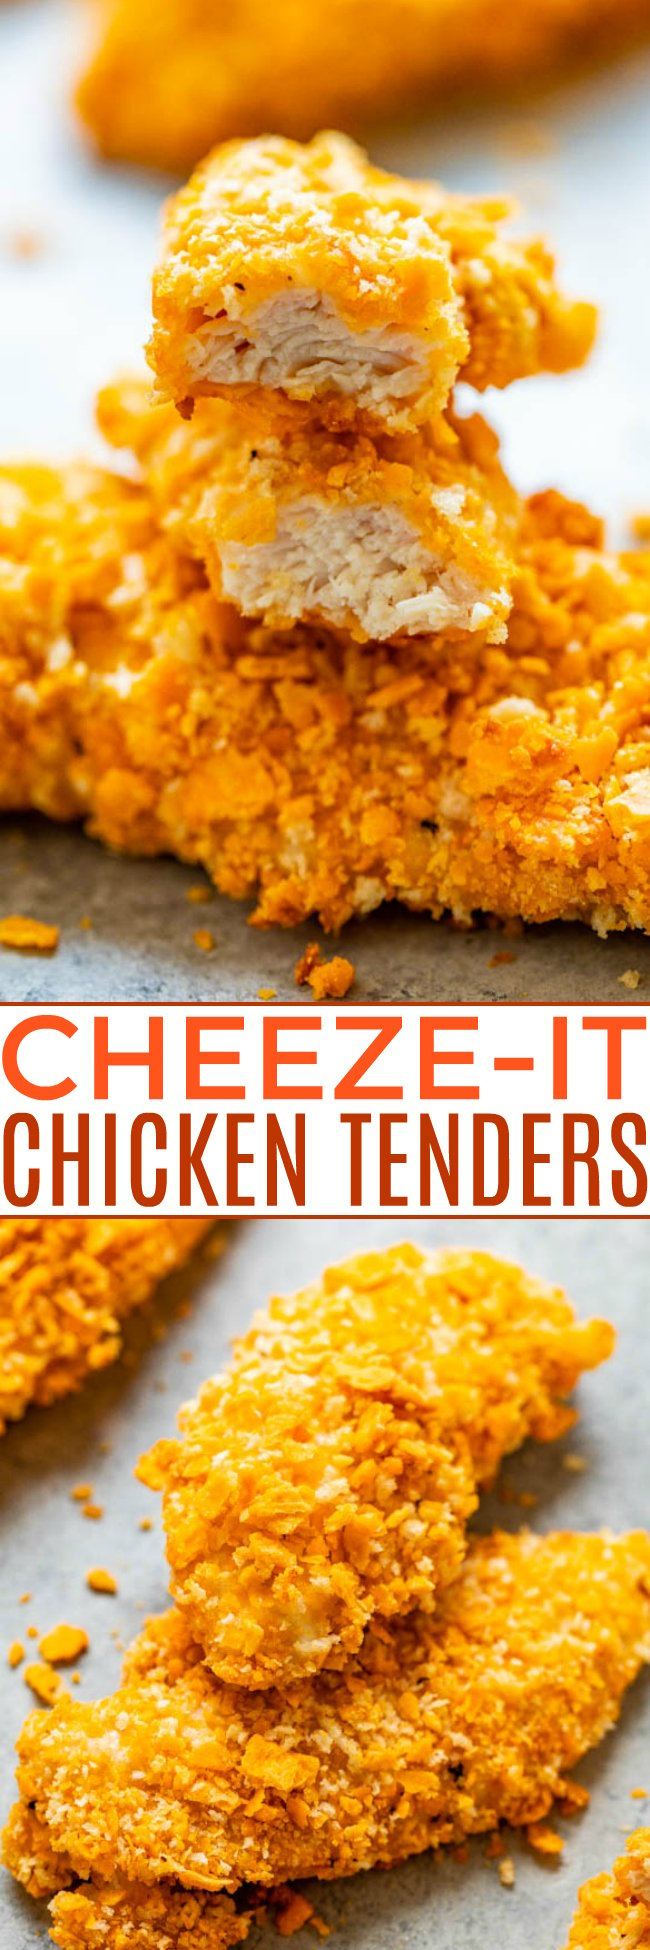 Cheeze-It Chicken Tenders - EASY, ready in 15 minutes, and so CRISPY on the outside thanks to a Cheeze-It Cracker coating!! Don’t bother frying chicken when you can bake it! If you like Cheeze-Its, you're going to LOVE this chicken!!